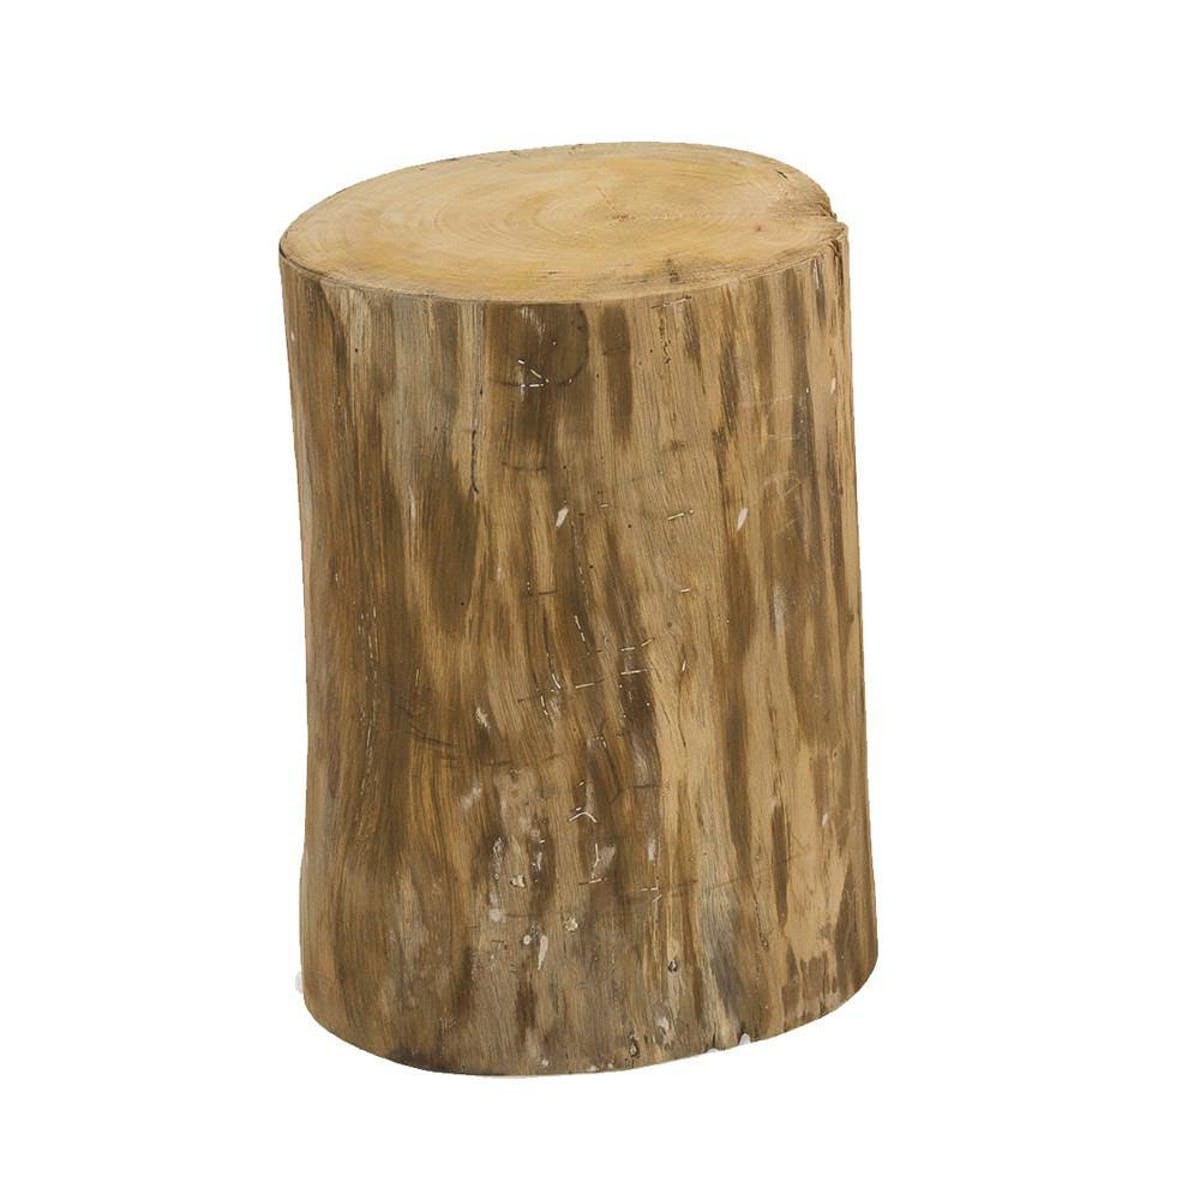 padma plantation natural tree stump side table wood accent tap expand wooden wine racks mirrored bedside next unique cabinet hardware white patio ese style lamps pottery barn